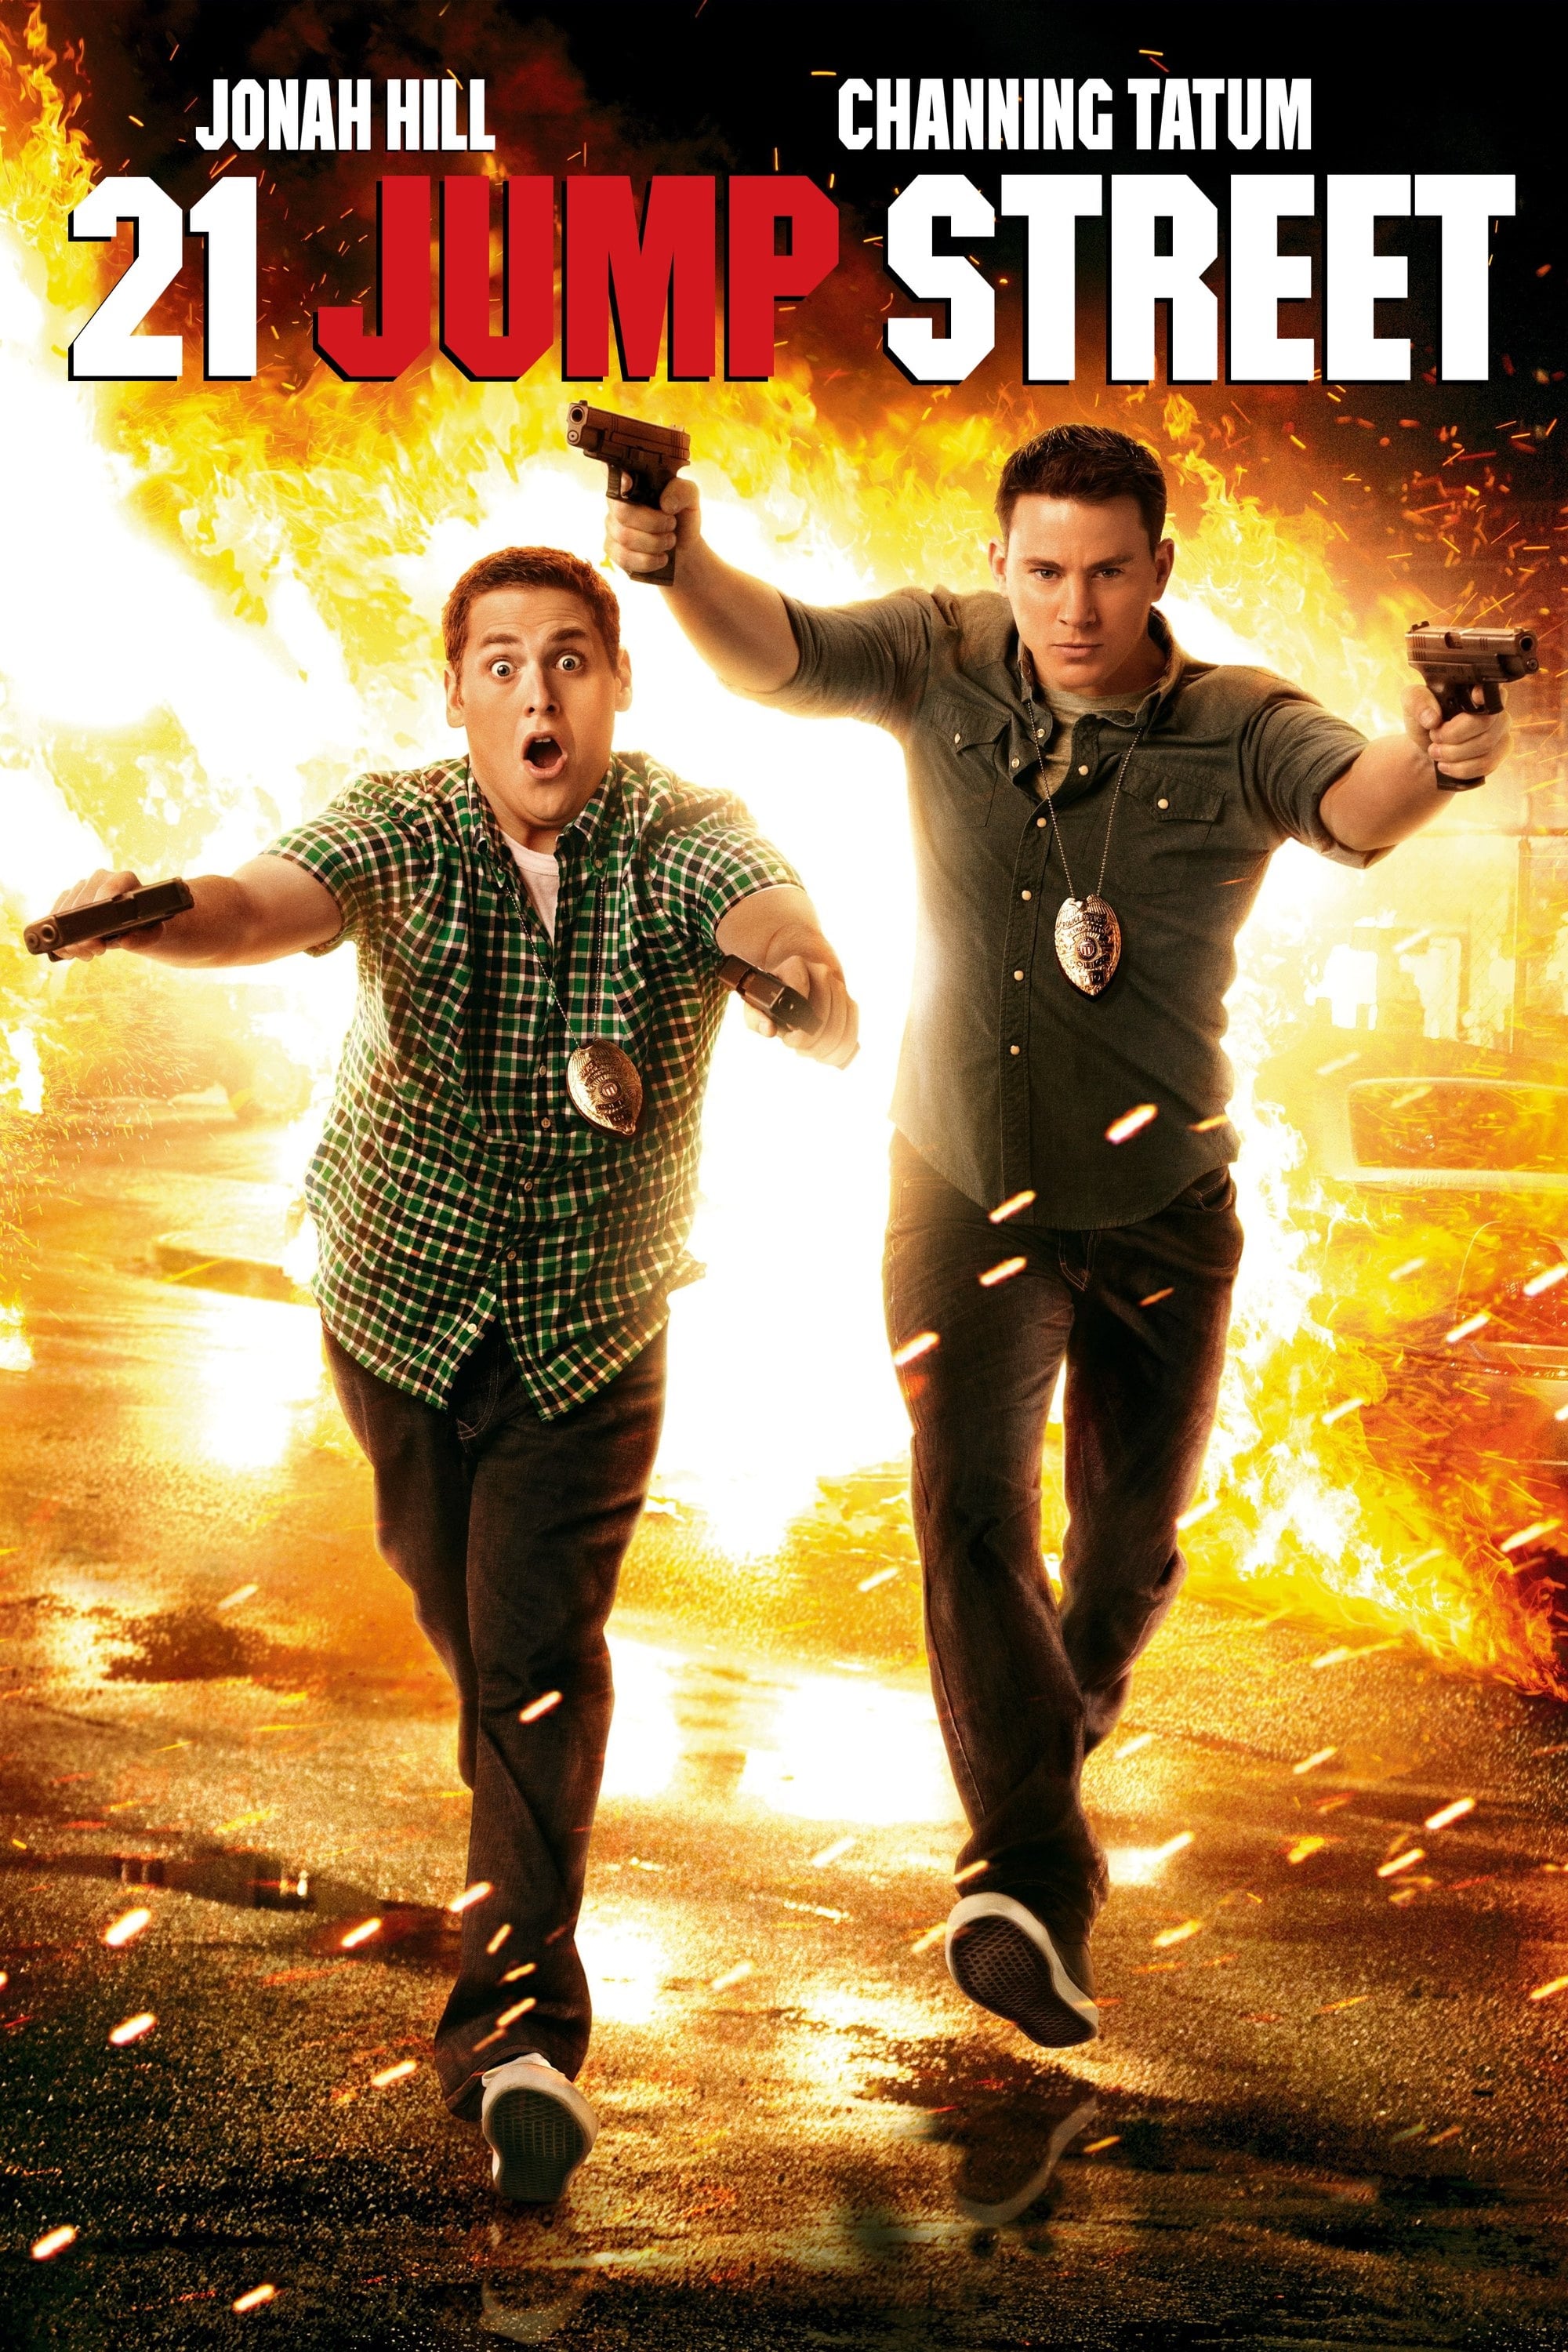 21 jump street movie review